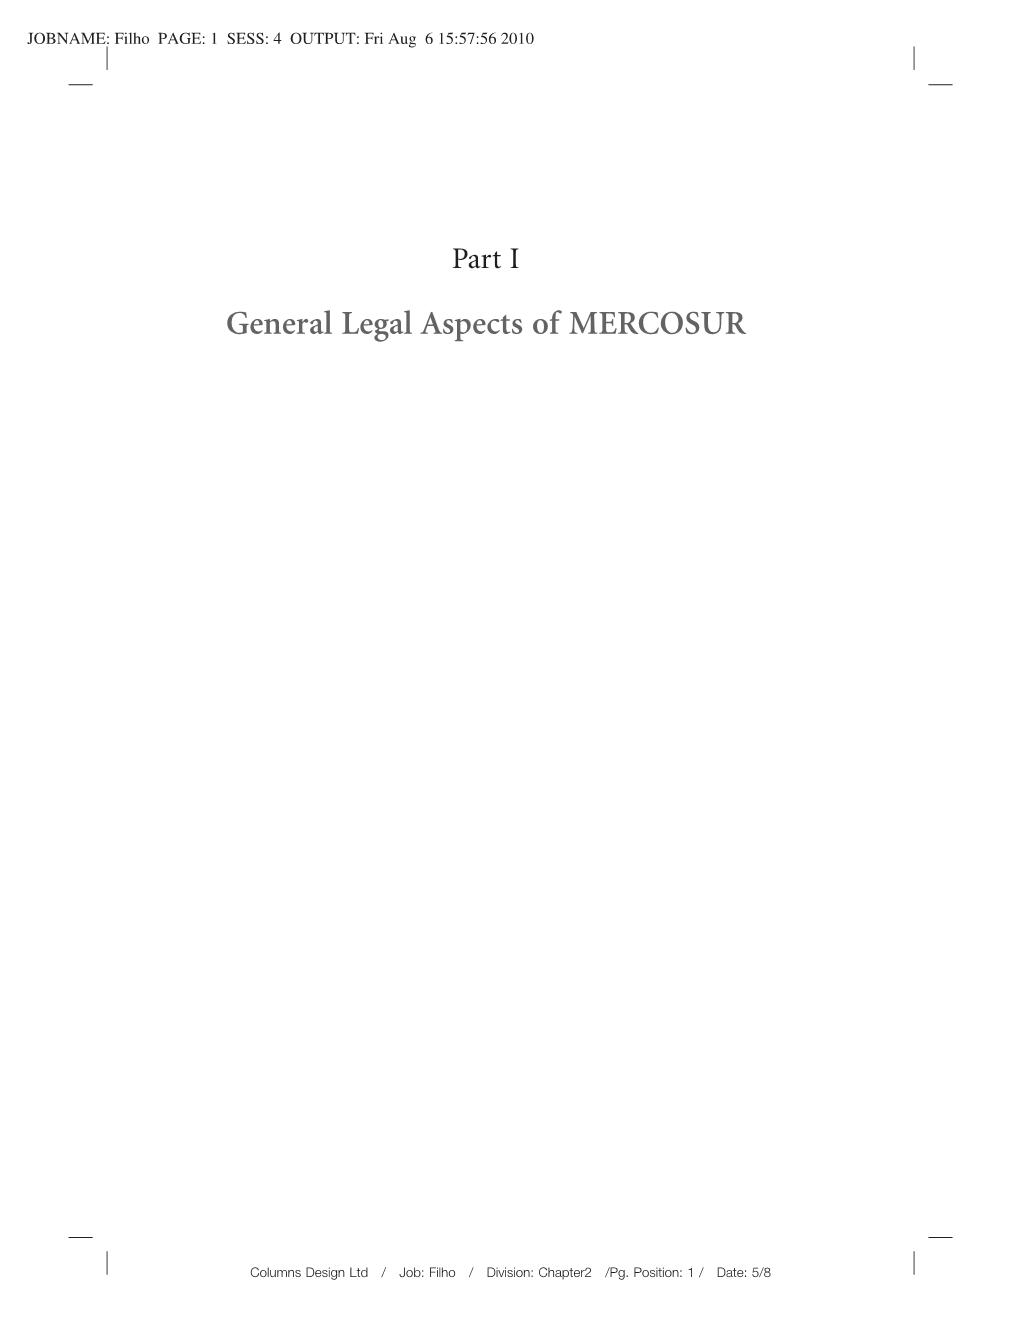 General Legal Aspects of MERCOSUR